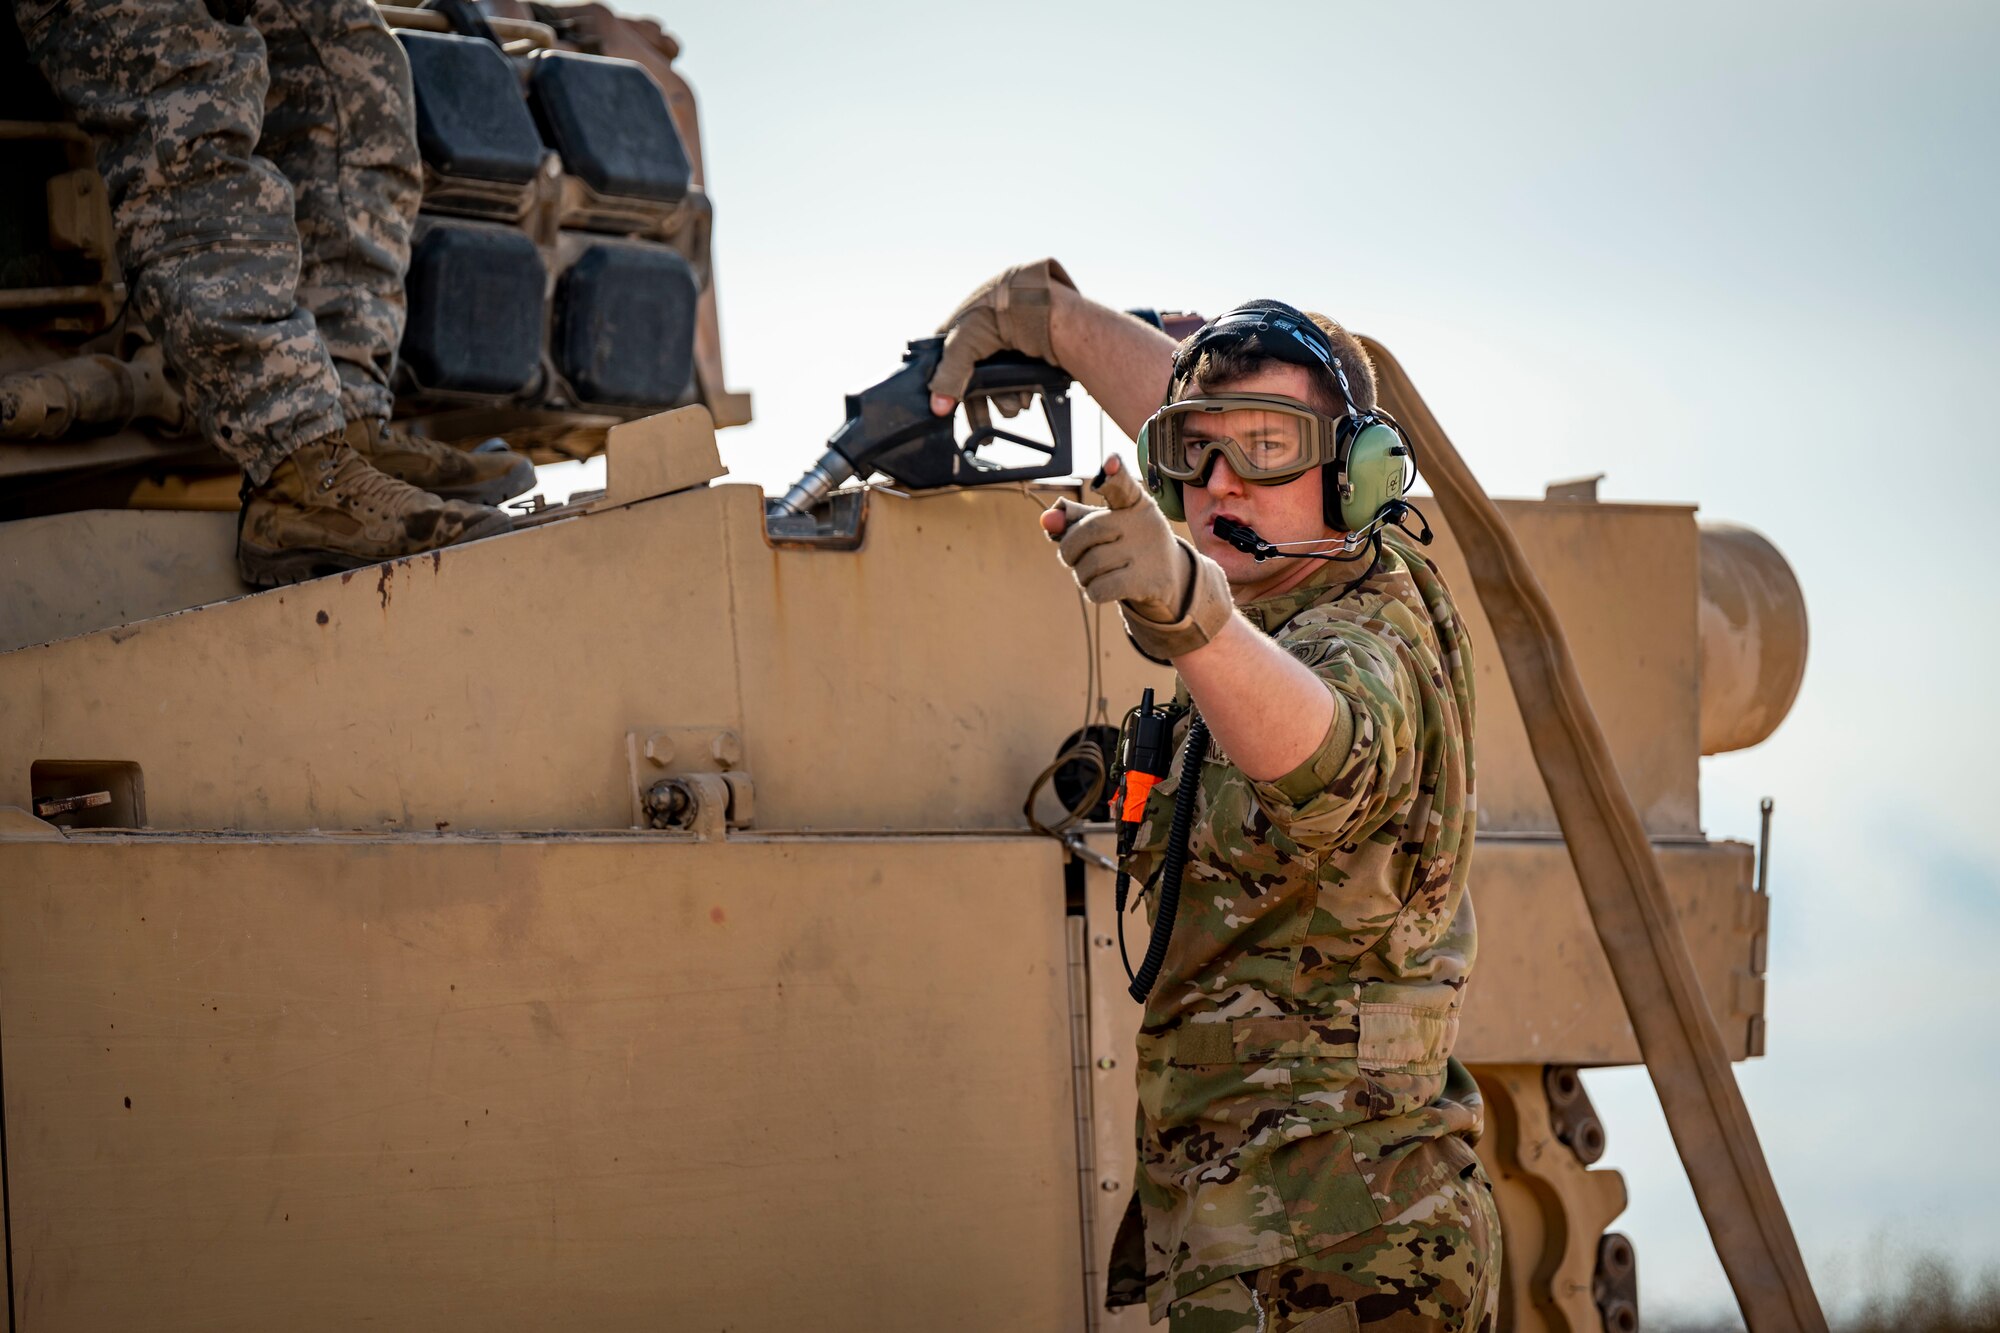 U.S. Air Force Tech. Sgt. Christopher Hofer, 40th Airlift Squadron weapons instructor, simulates refueling a M1A2 Abrams tank from a C-130J Super Hercules at Fort Bliss, Texas, Dec. 9, 2022. Dyess Air Force Base and Fort Bliss conducted a joint dry run to assess feasibility, equipment familiarization, and rehearsal of fueling operations. (U.S. Air Force photo by Senior Airman Leon Redfern)